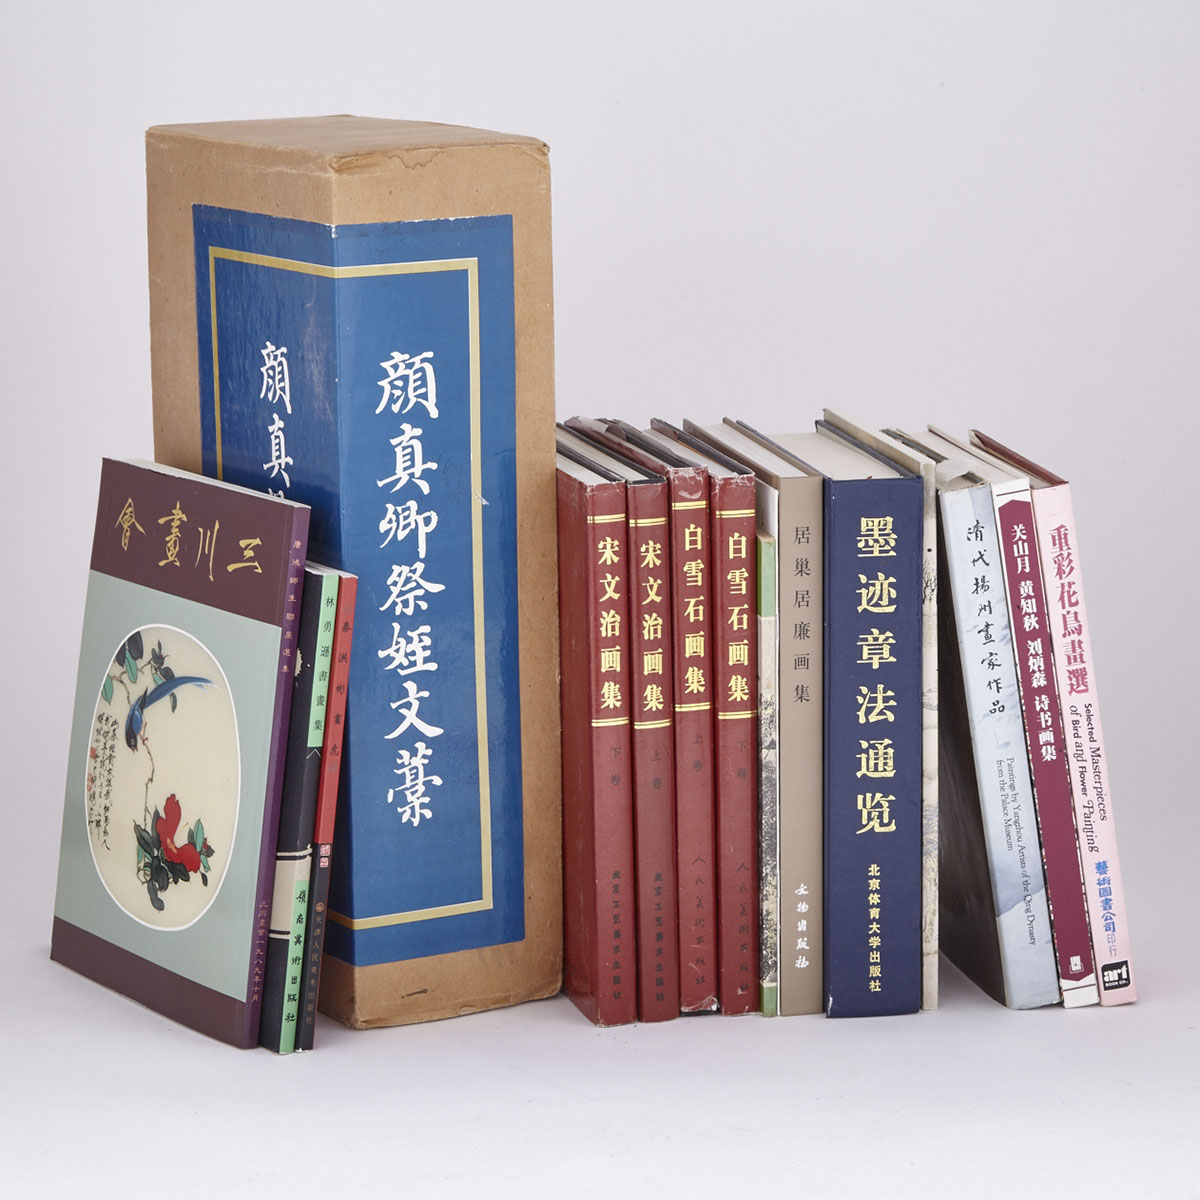 16 Volumes on Chinese Painting Masters